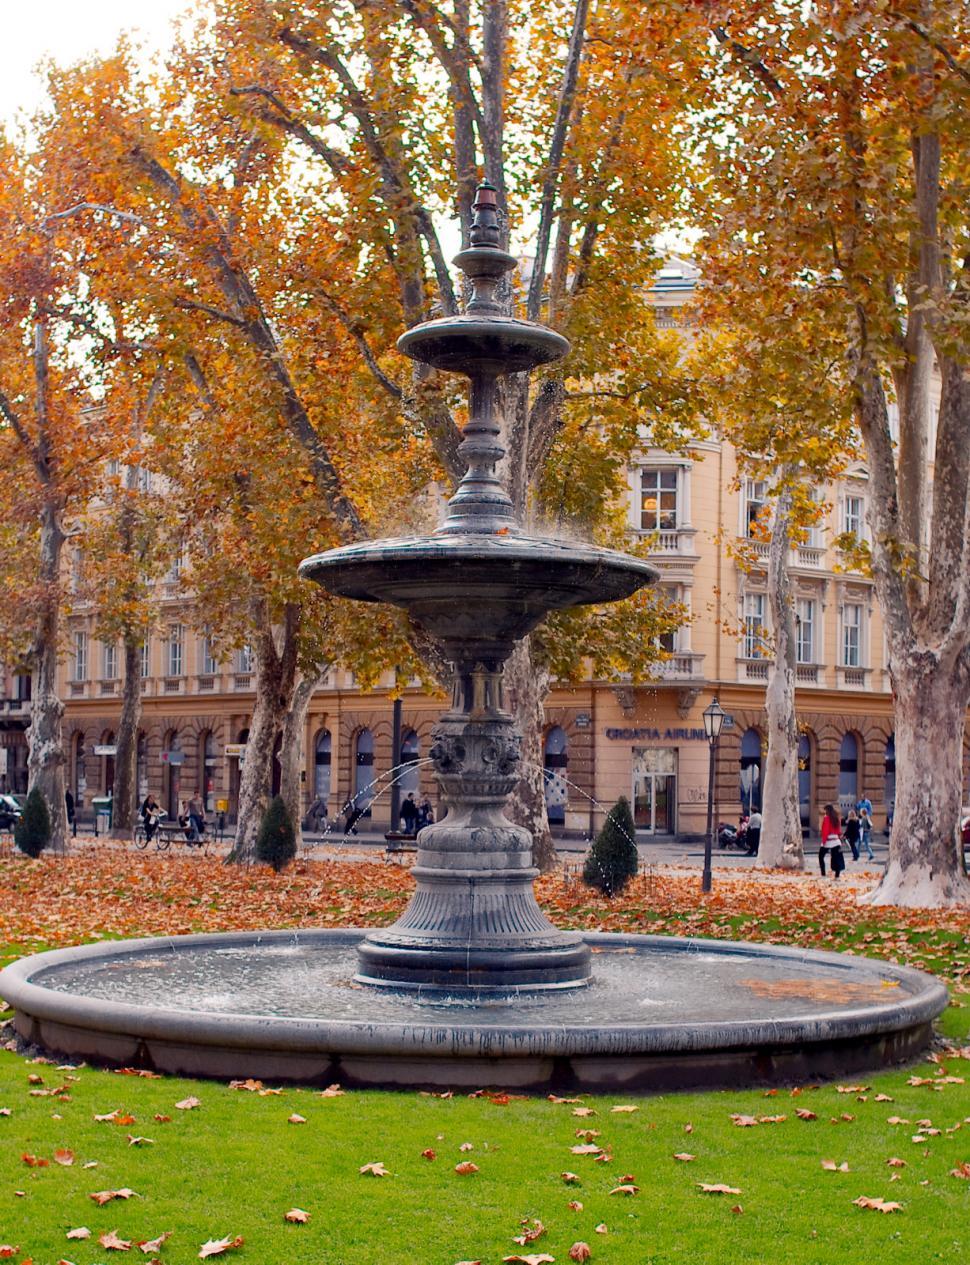 Free Image of Old fountain 